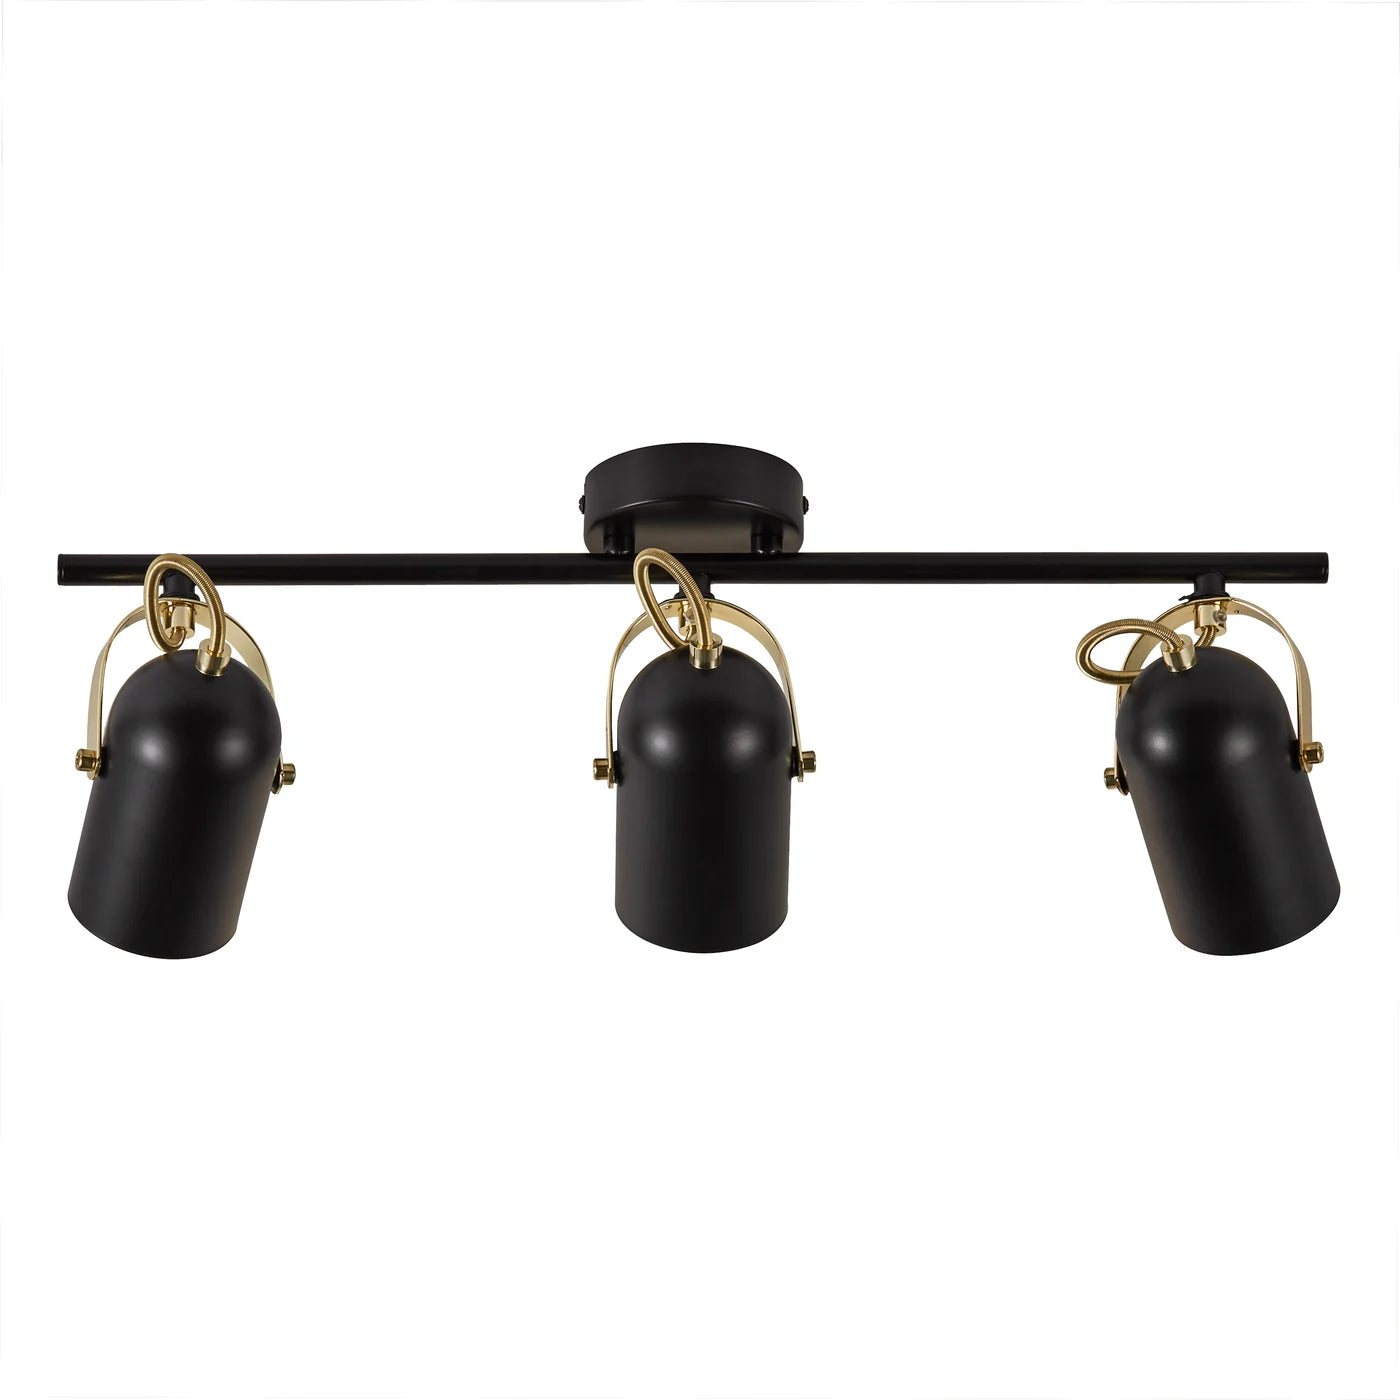 LOTUS TRIO ceiling lamp black with gold details